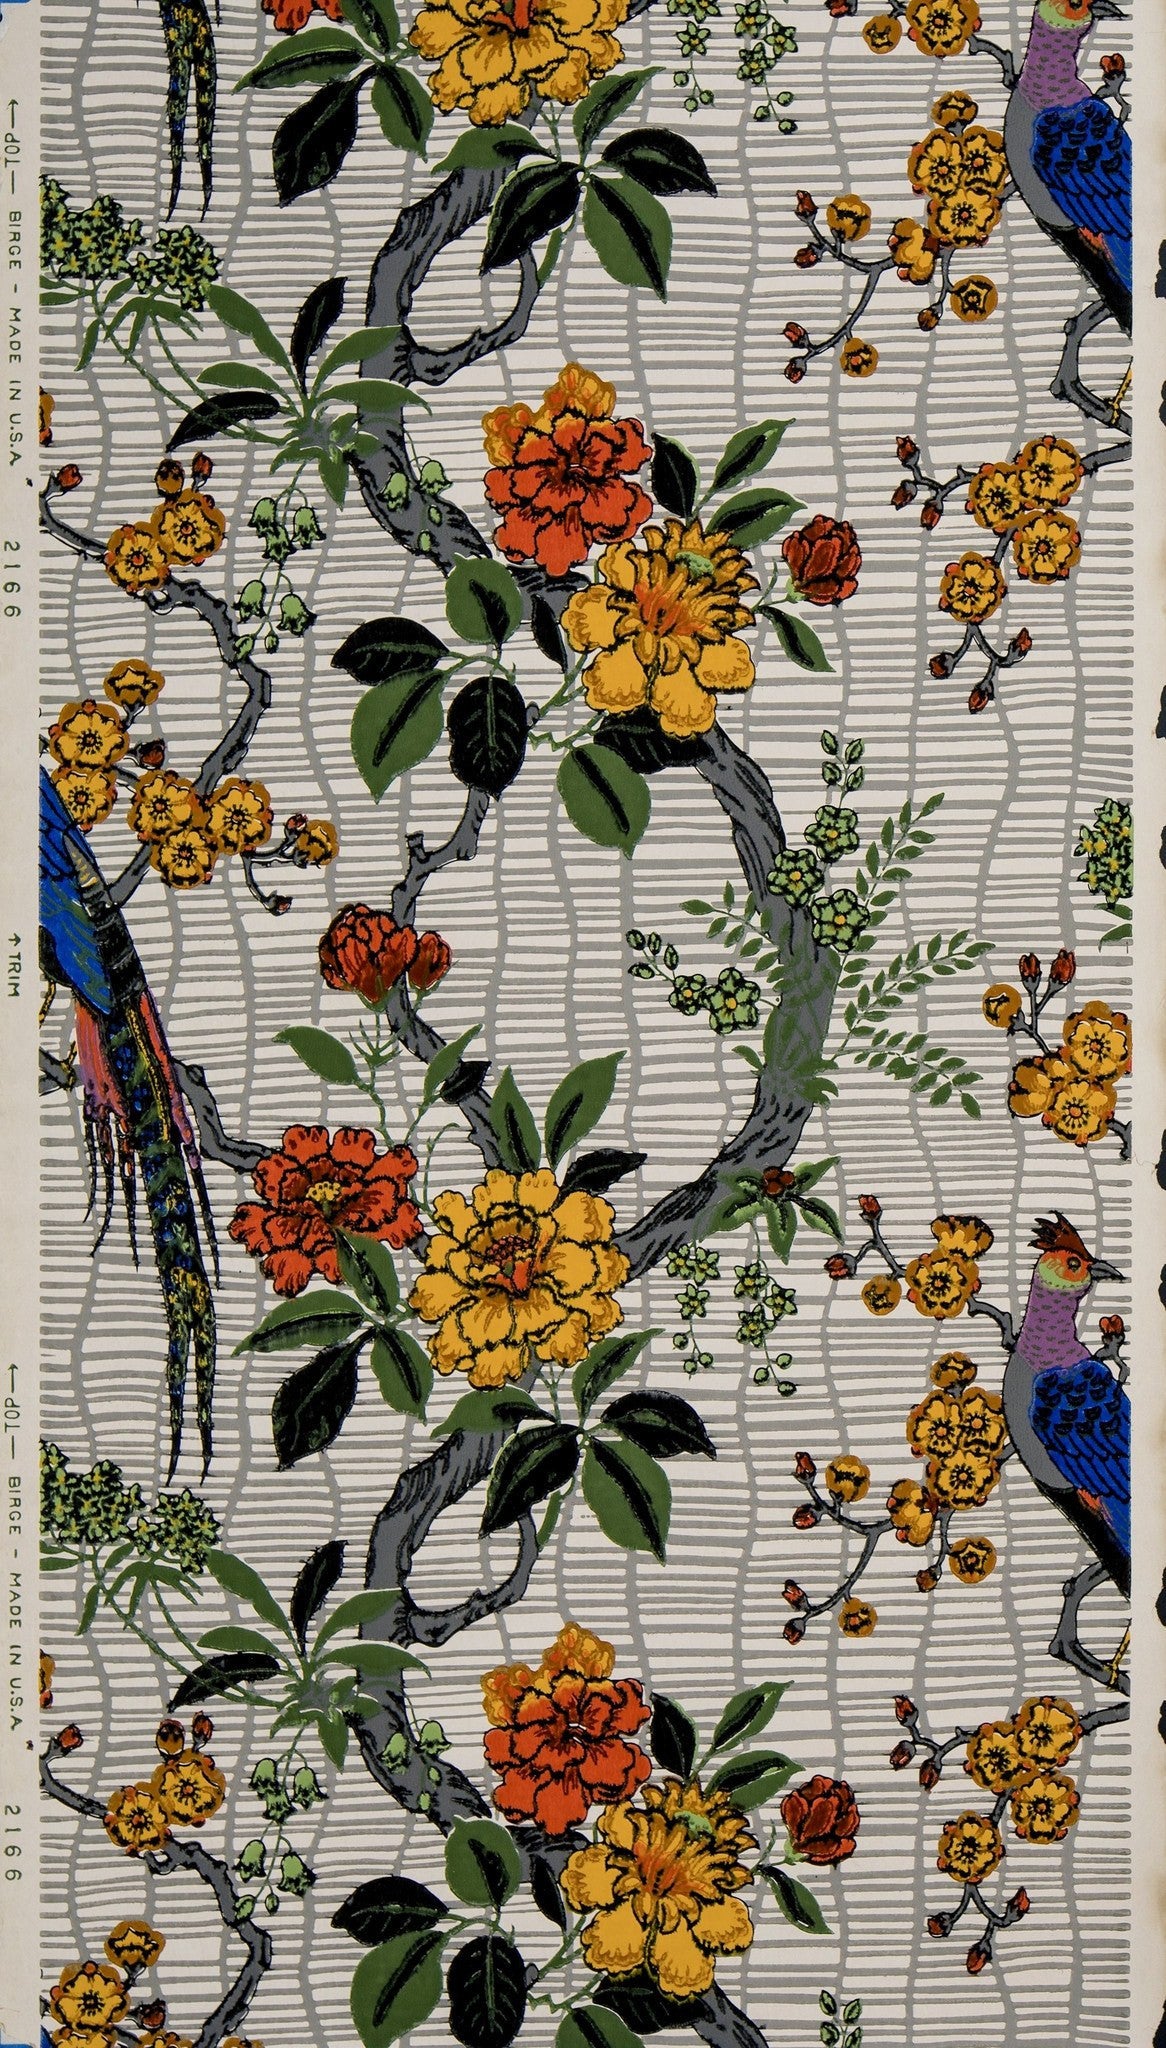 Feathered Bird Amid Flowering Vines - Antique Wallpaper Remnant